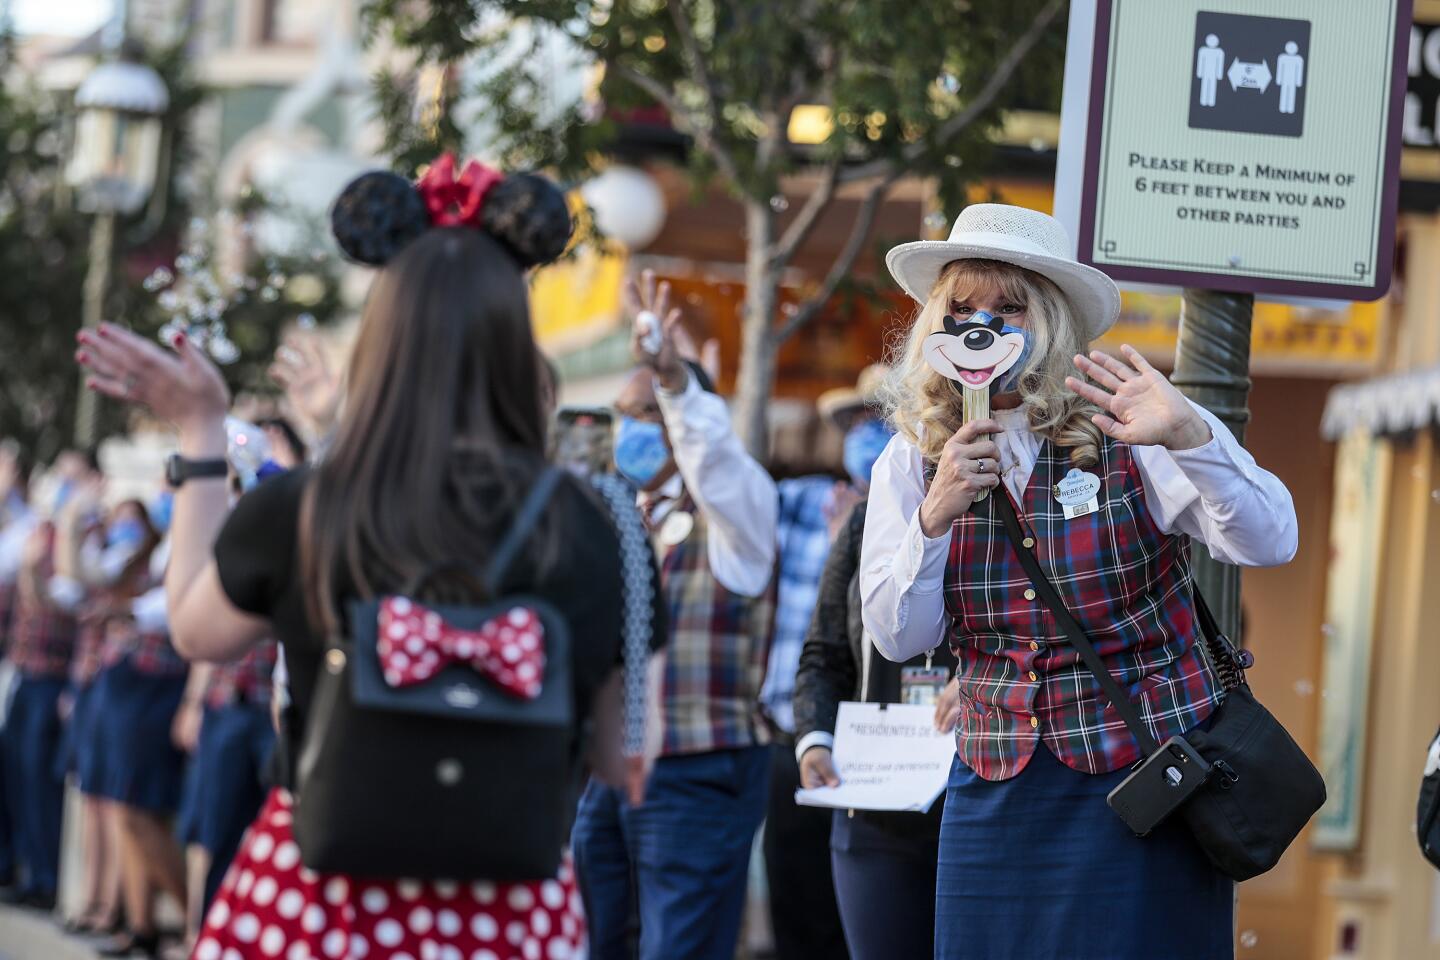 A woman in a mask greets a visitor in Minnie Mouse garb